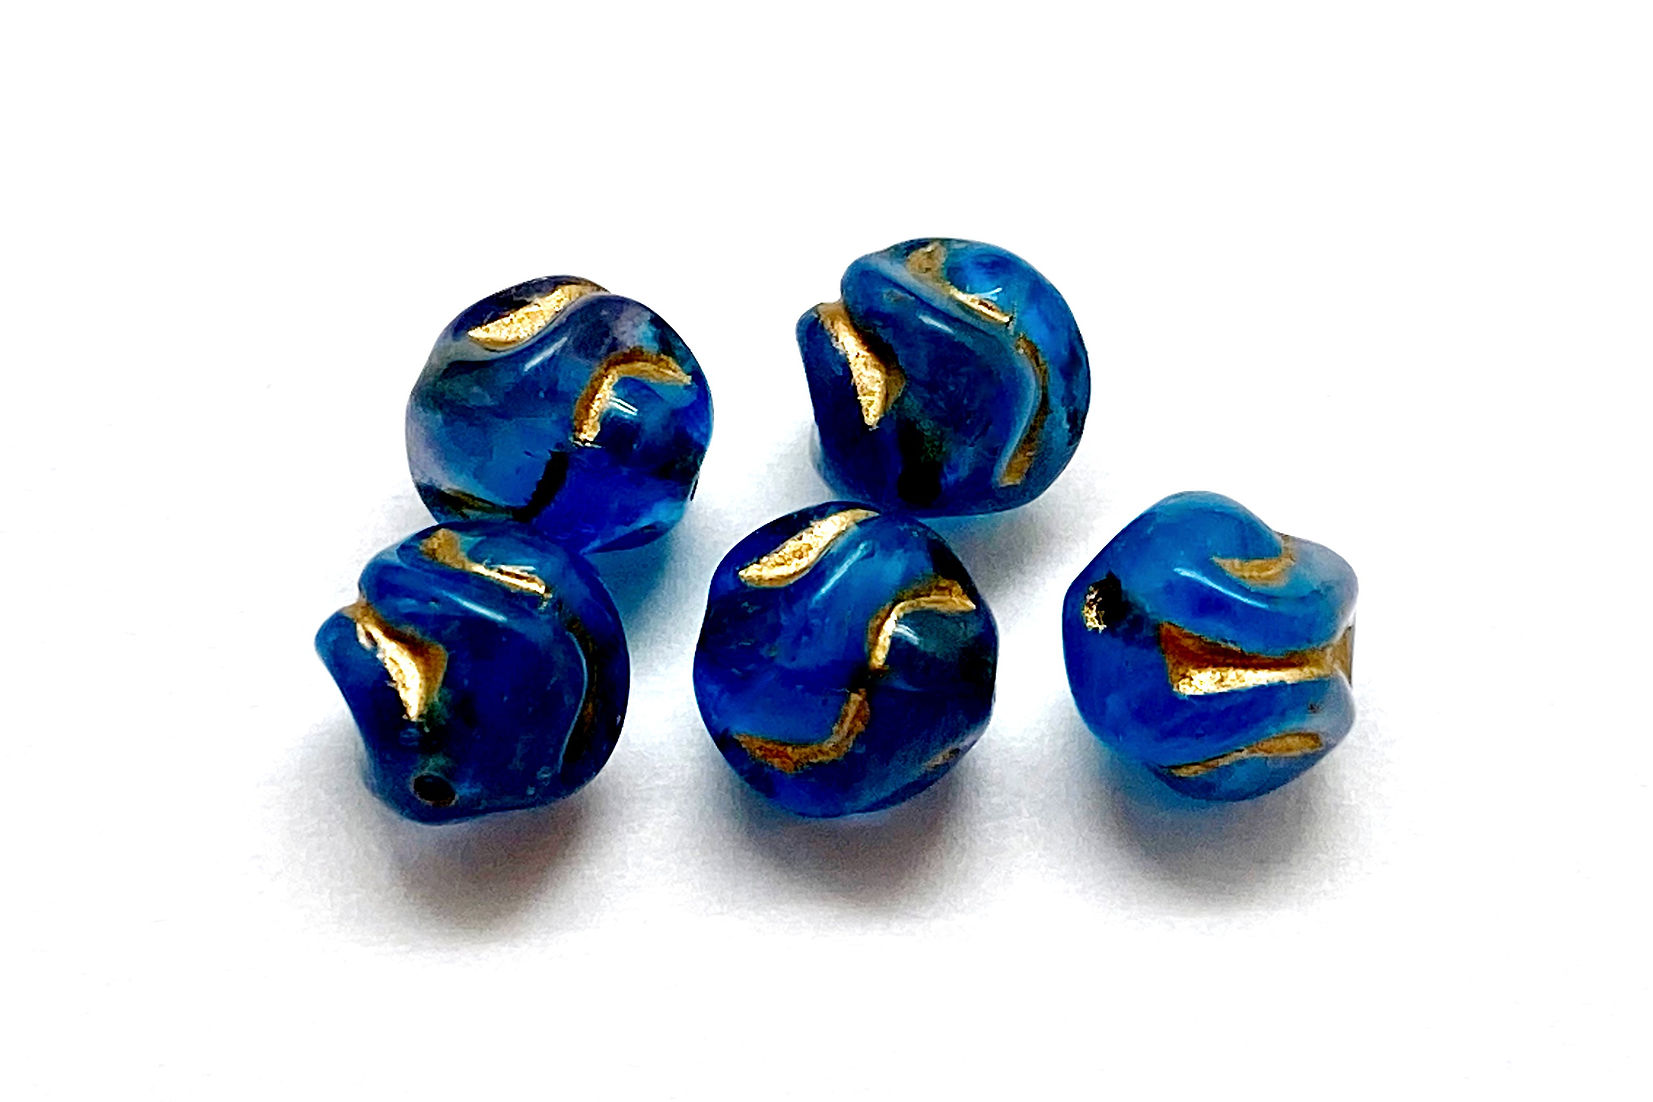 Transparent Ocean Blue Glass with Gold Wash 8mm Love Knots Bead - 10 pcs.-The Bead Gallery Honolulu